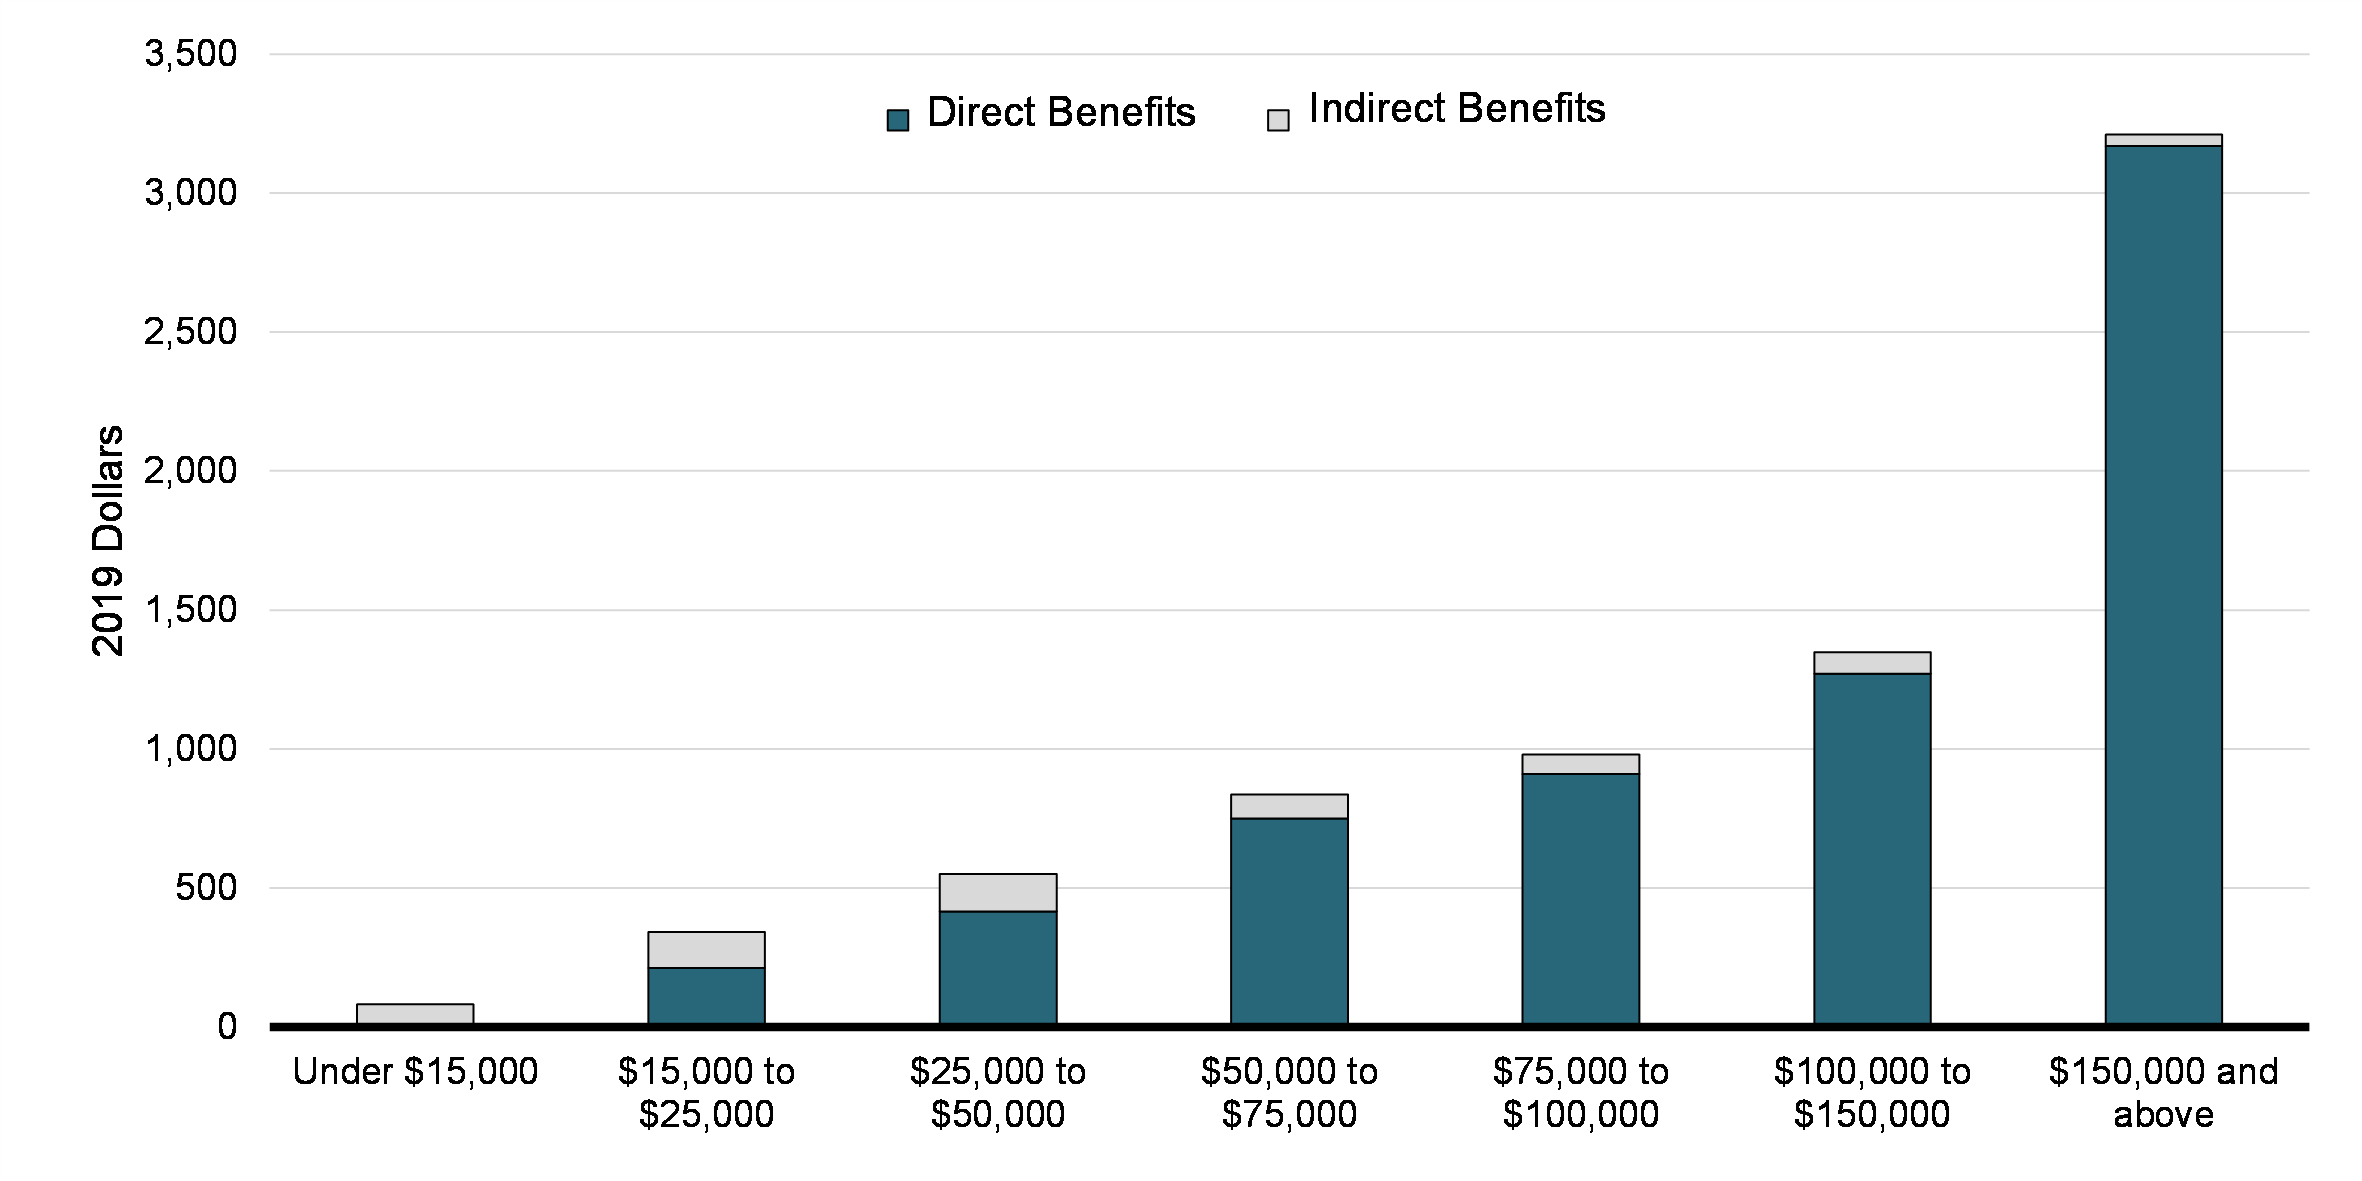  Chart 38: Direct and Indirect Benefits of OEE Deductions, by Income Group (2018), in 2019 Dollars
